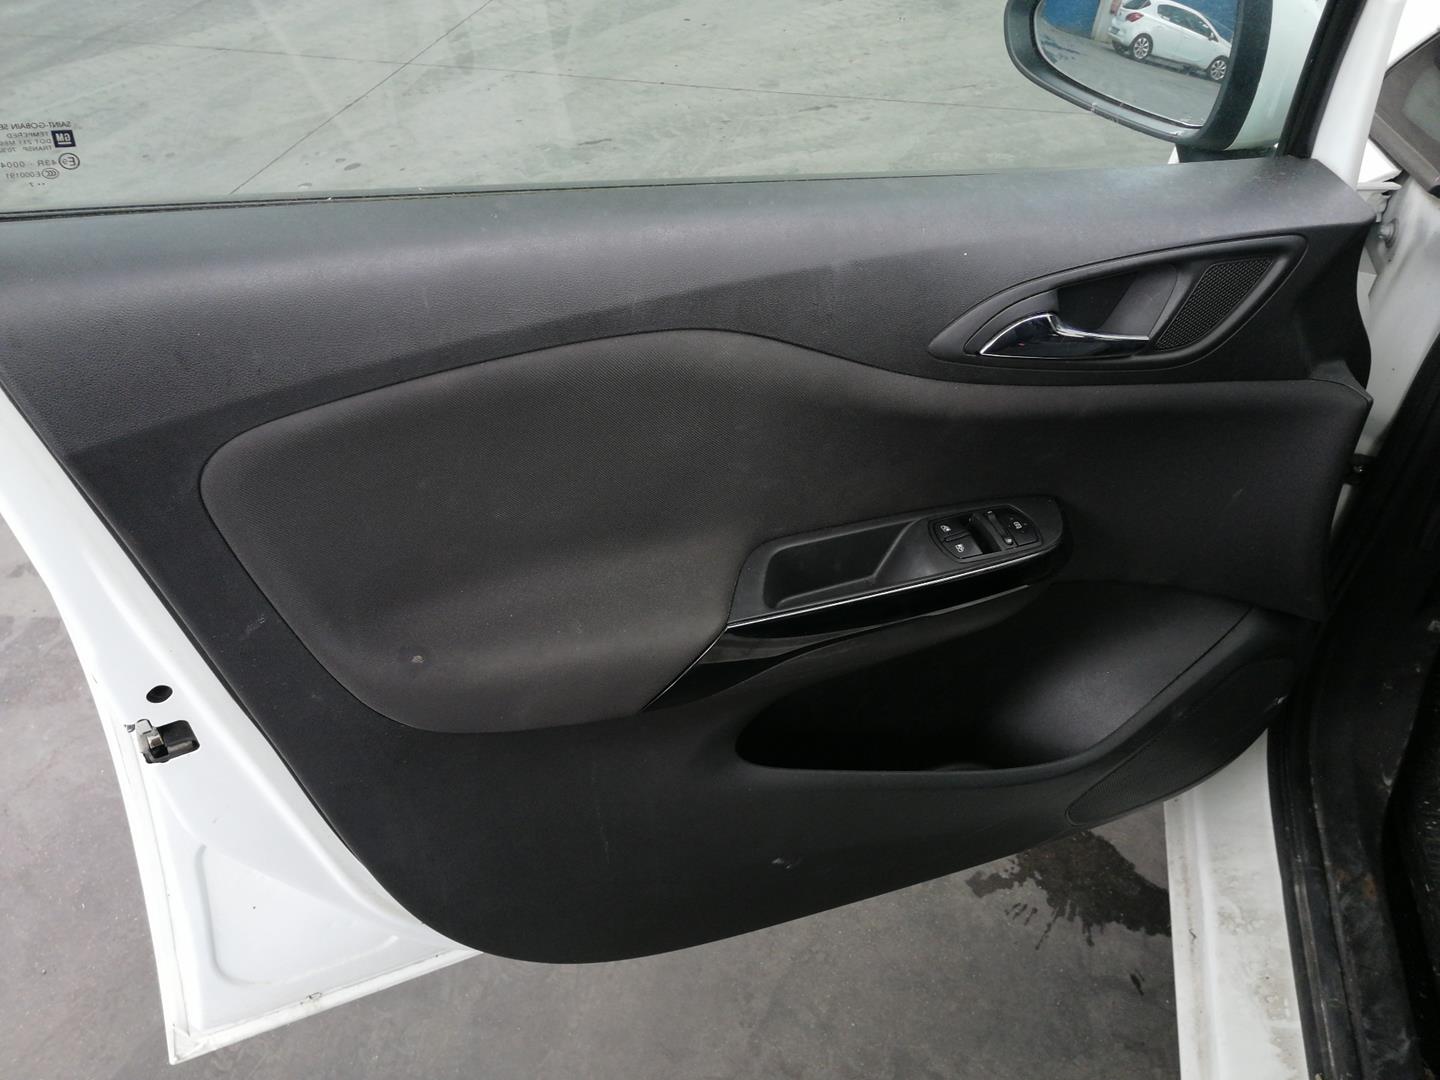 OPEL Corsa D (2006-2020) Left Side Roof Airbag SRS 39045977, 367416257, AUTOLIV 24164080